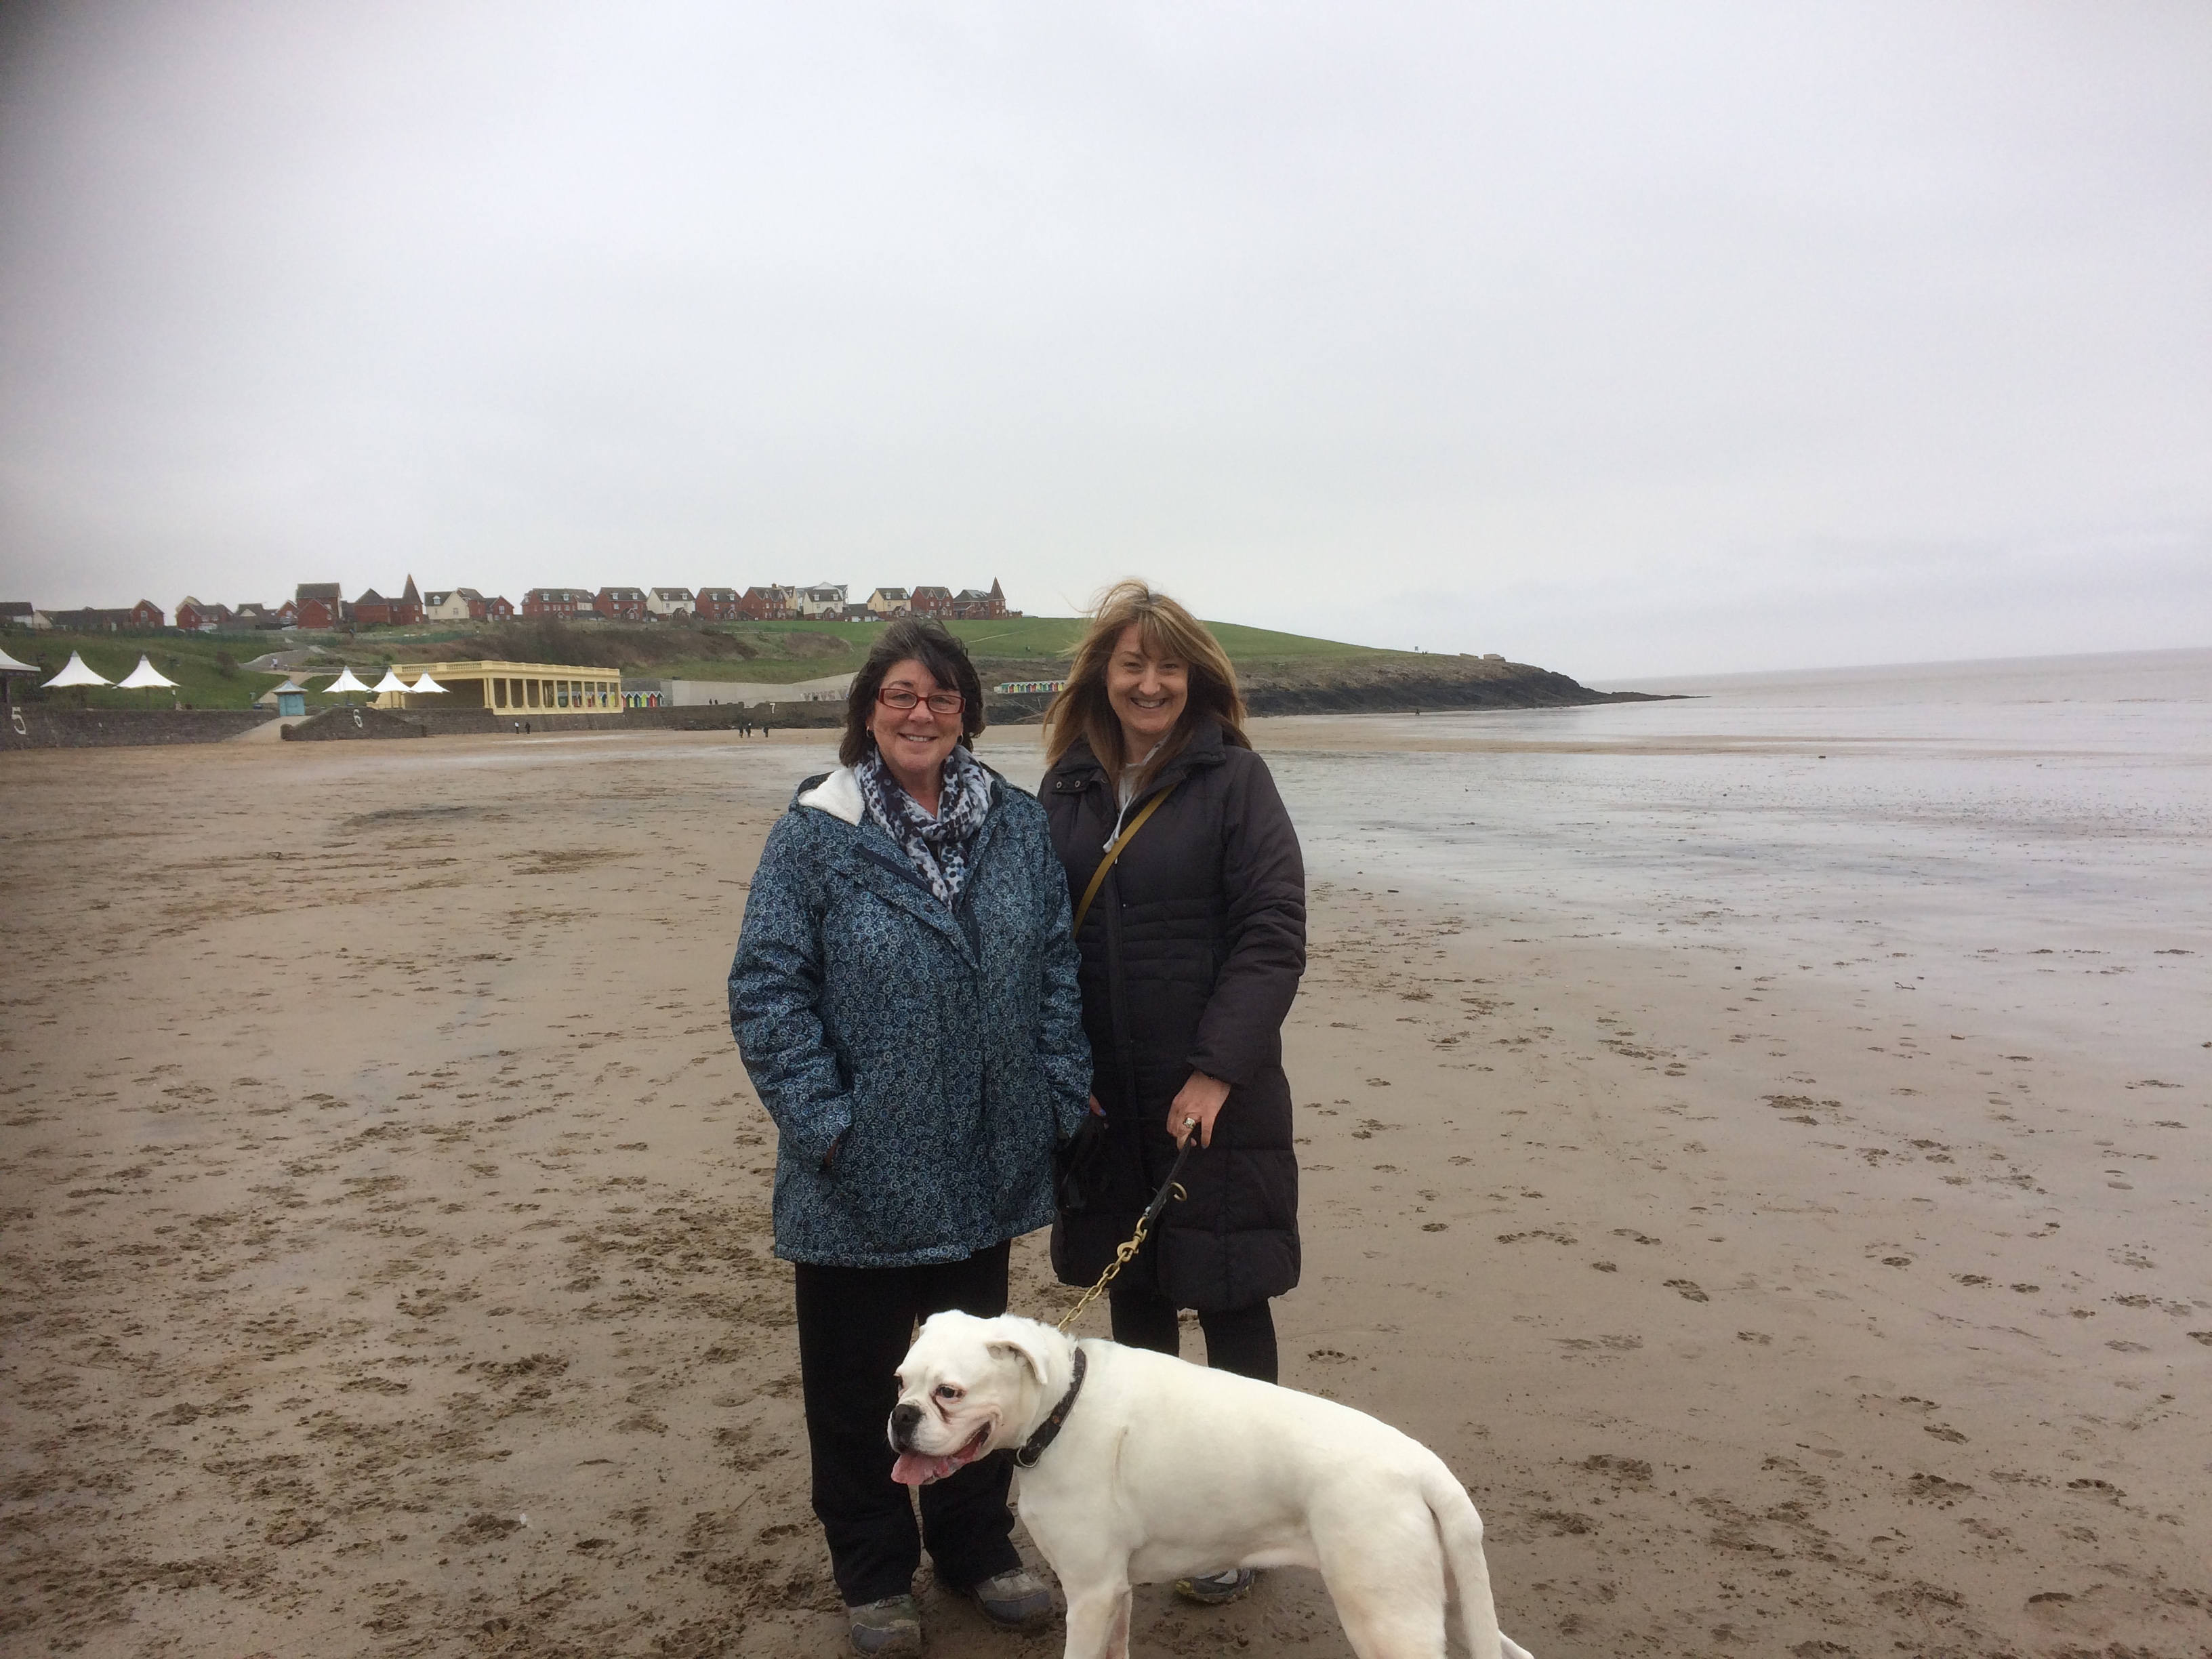 Dog walkersm Jo Davies, 55, and Sarah Hayward, 47, say they are not bothered by the charges